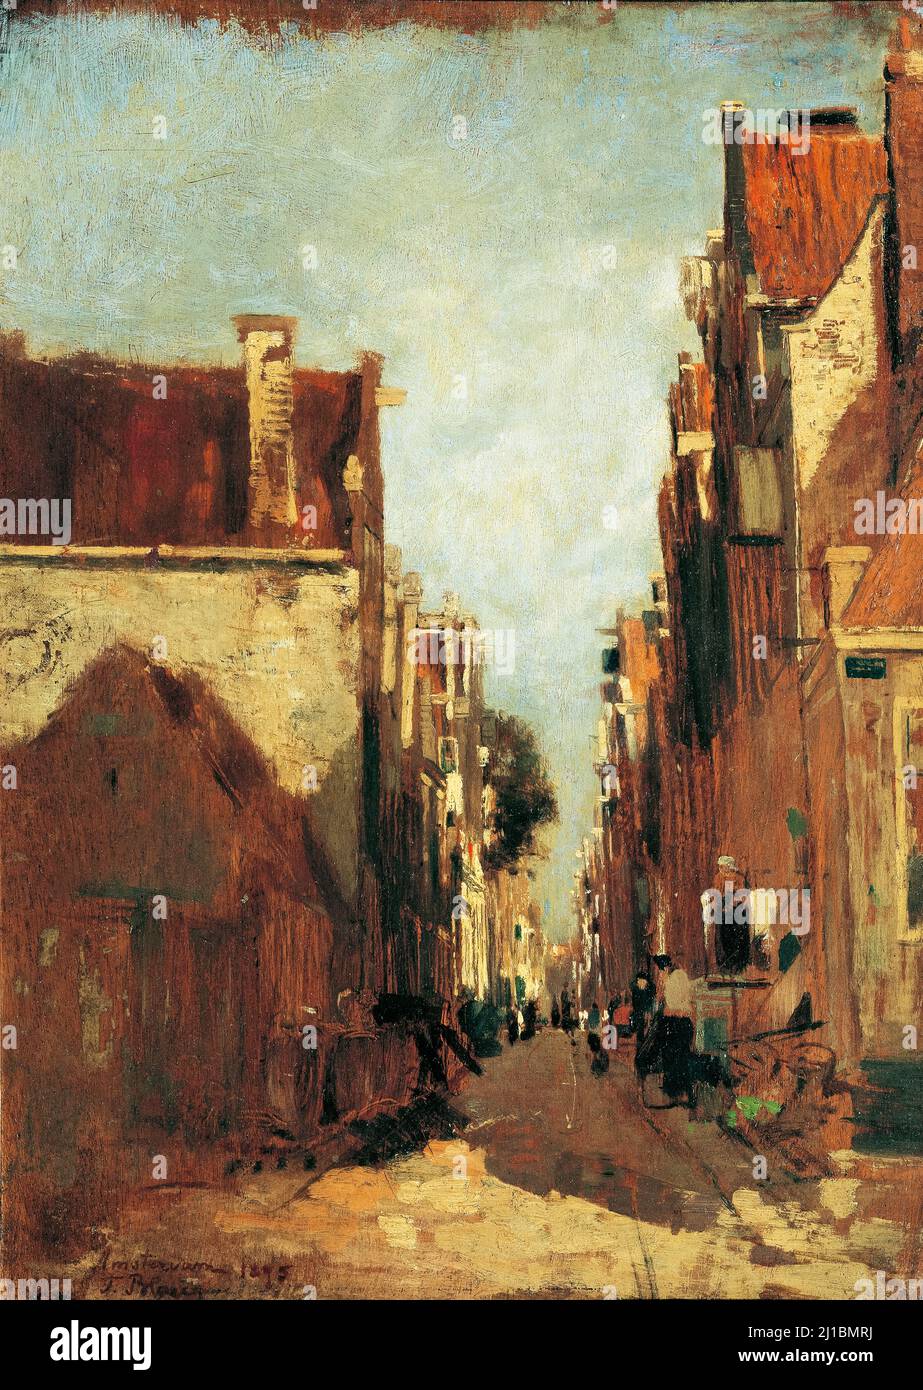 Straße in Amsterdam (Street in Amsterdam), landscape painting in oil by Tina Blau, 1875 Stock Photo